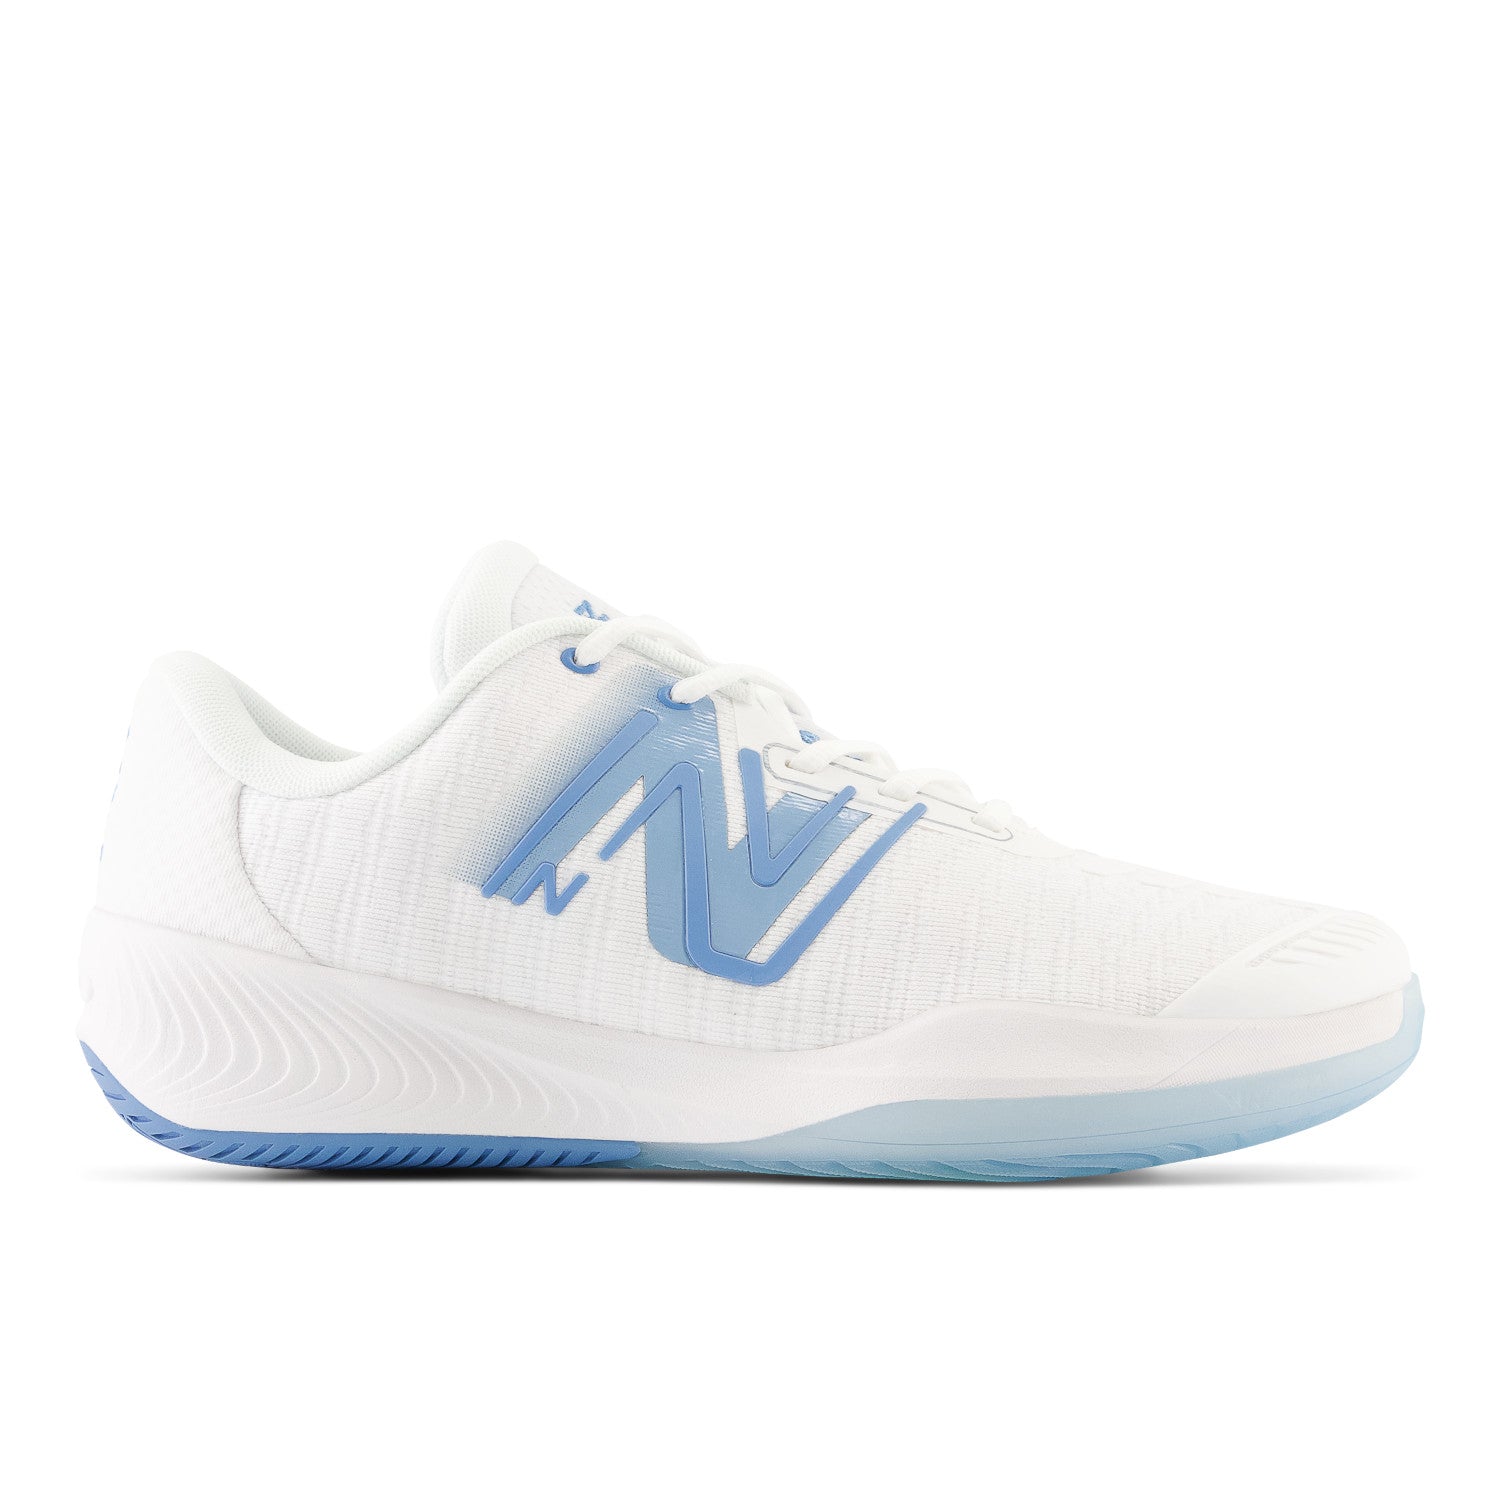 New Balance Fuel Cell 996v5 WCH996N5 Women's3